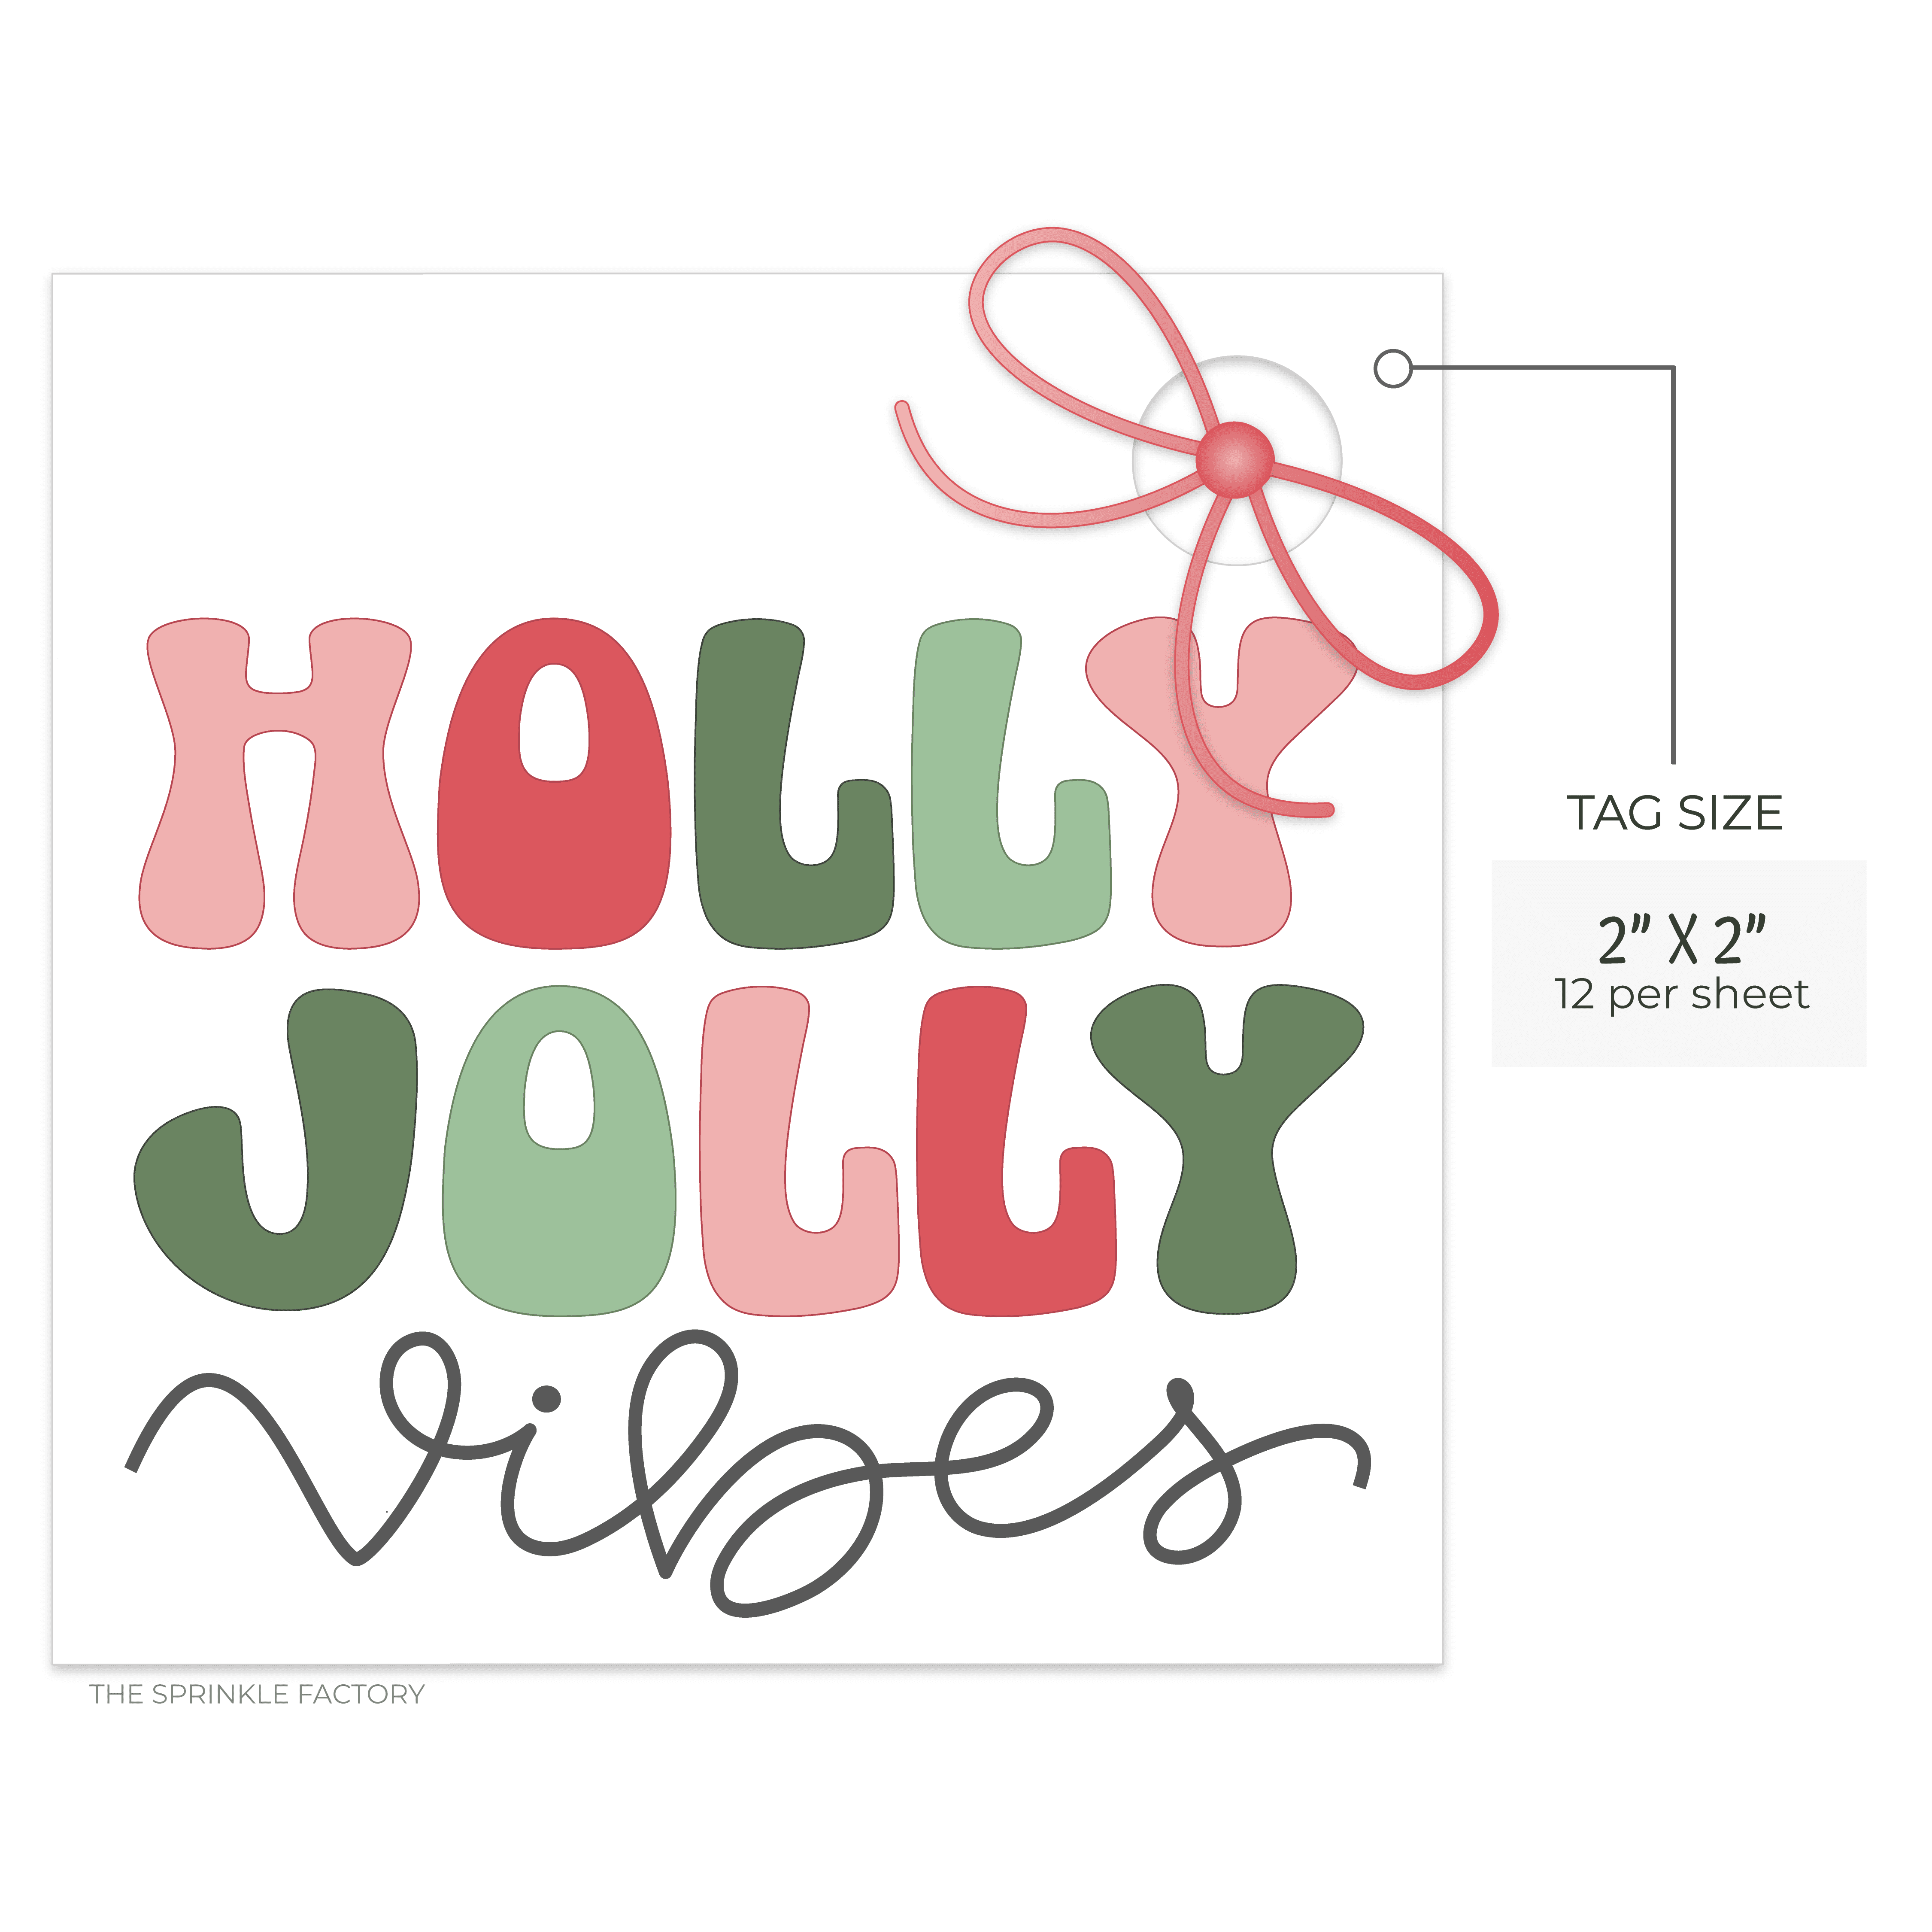 Image of a digital white tag that read Holly Jolly Vibes with a red bow at the top.